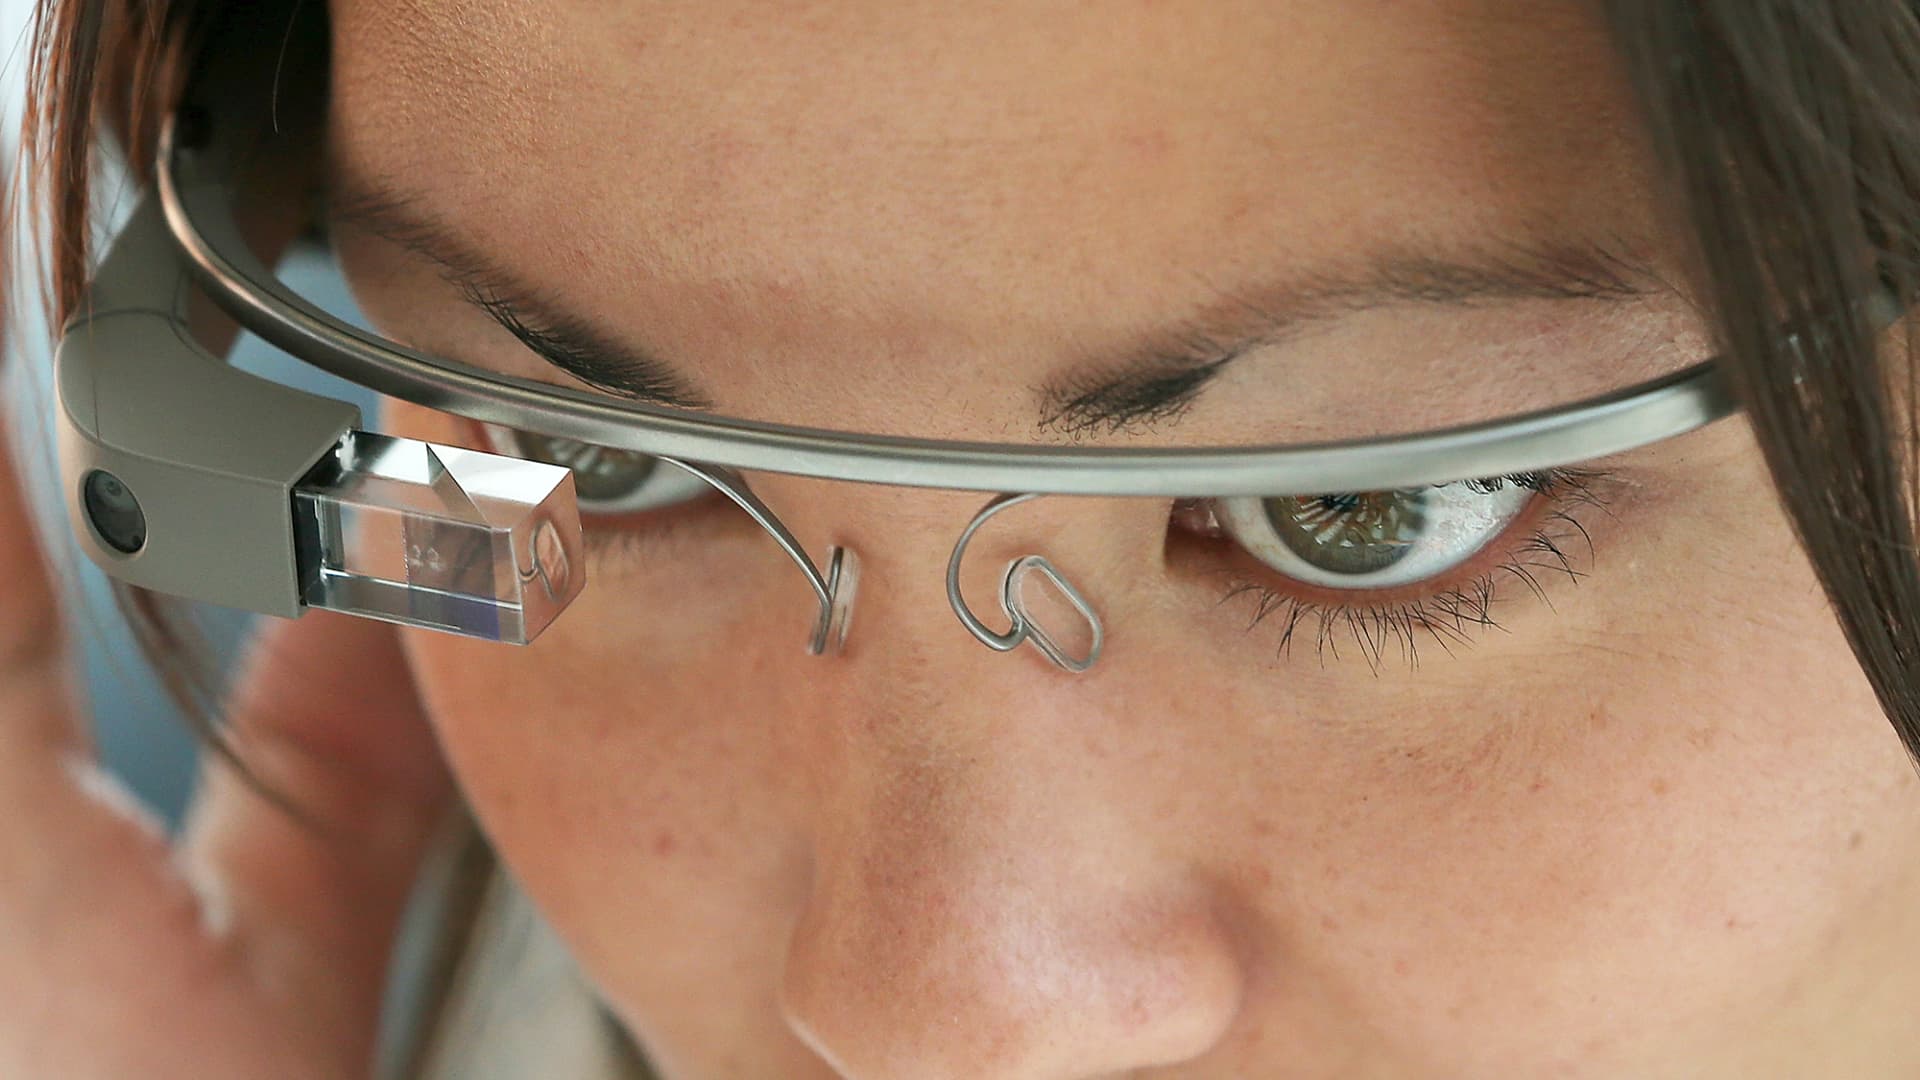 An attendee tries Google Glass during the Google I/O developer conference in San Francisco.